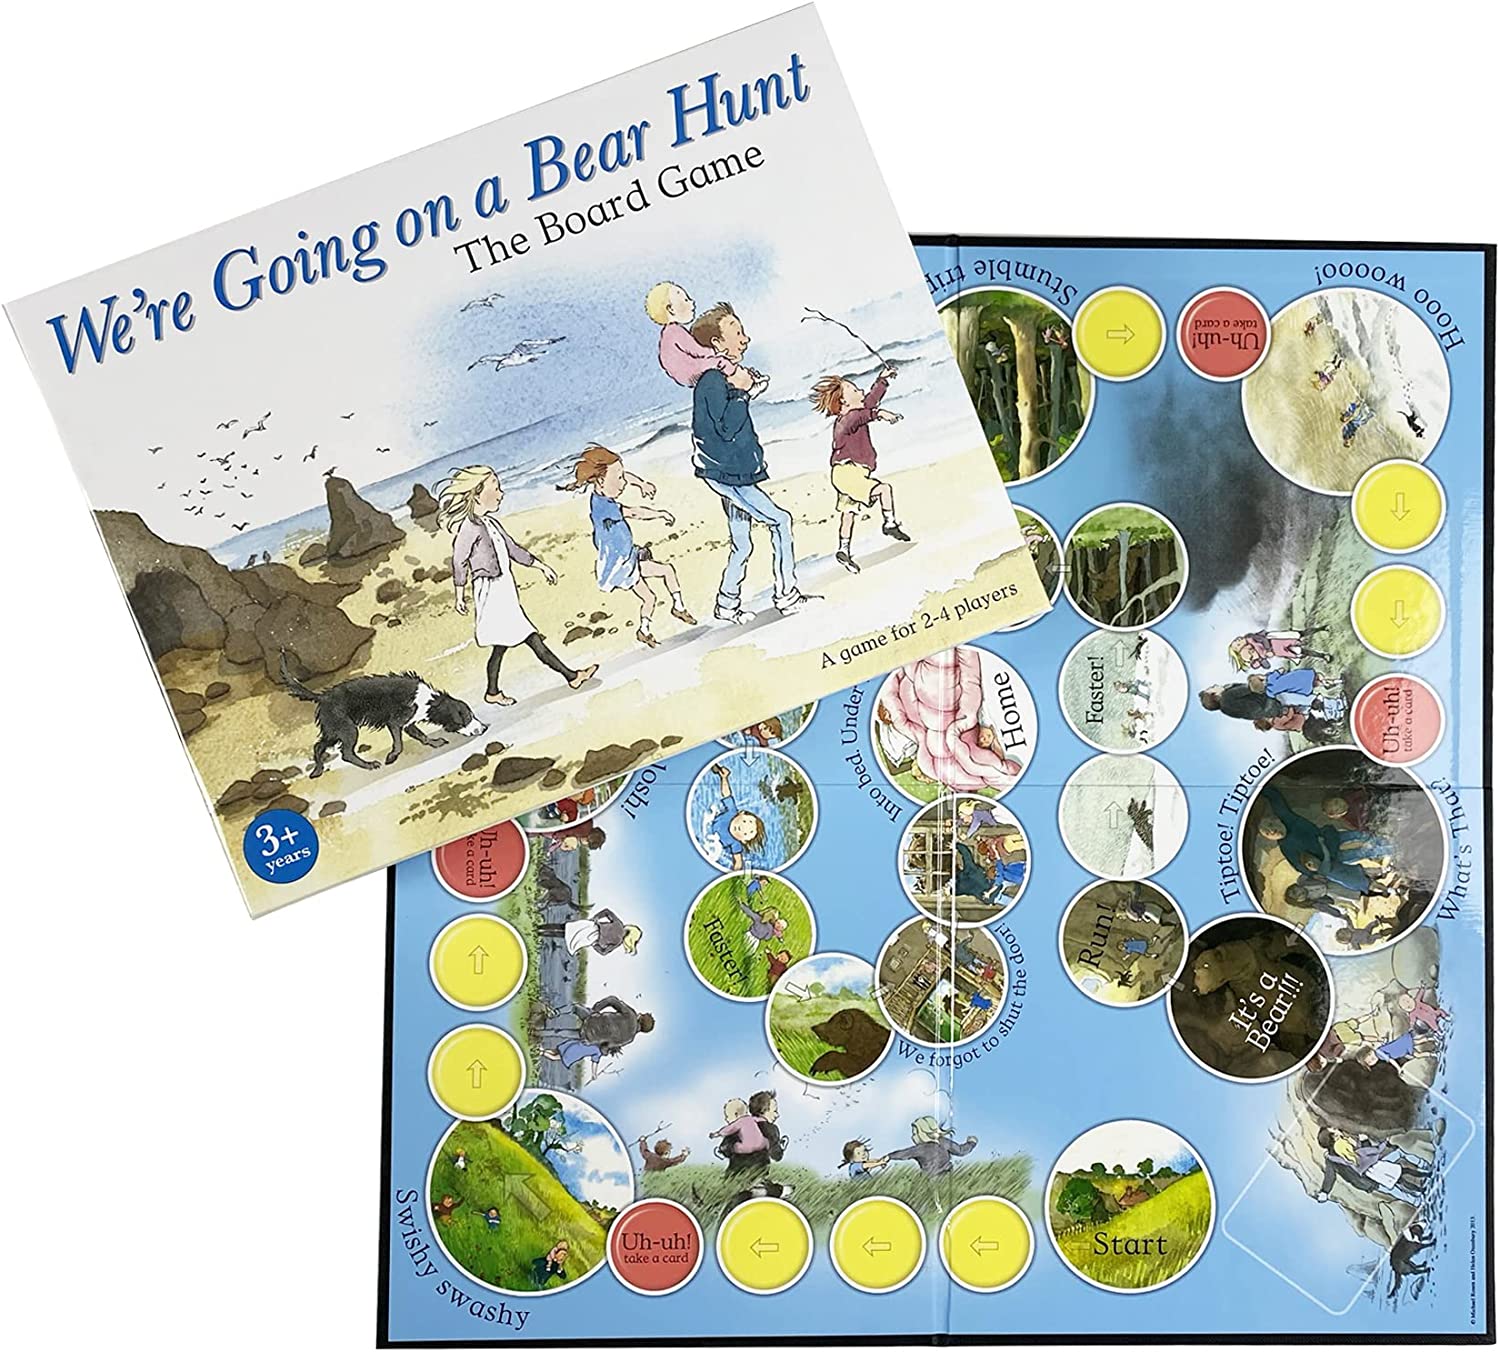 We re Going on a Bear Hunt Board Game